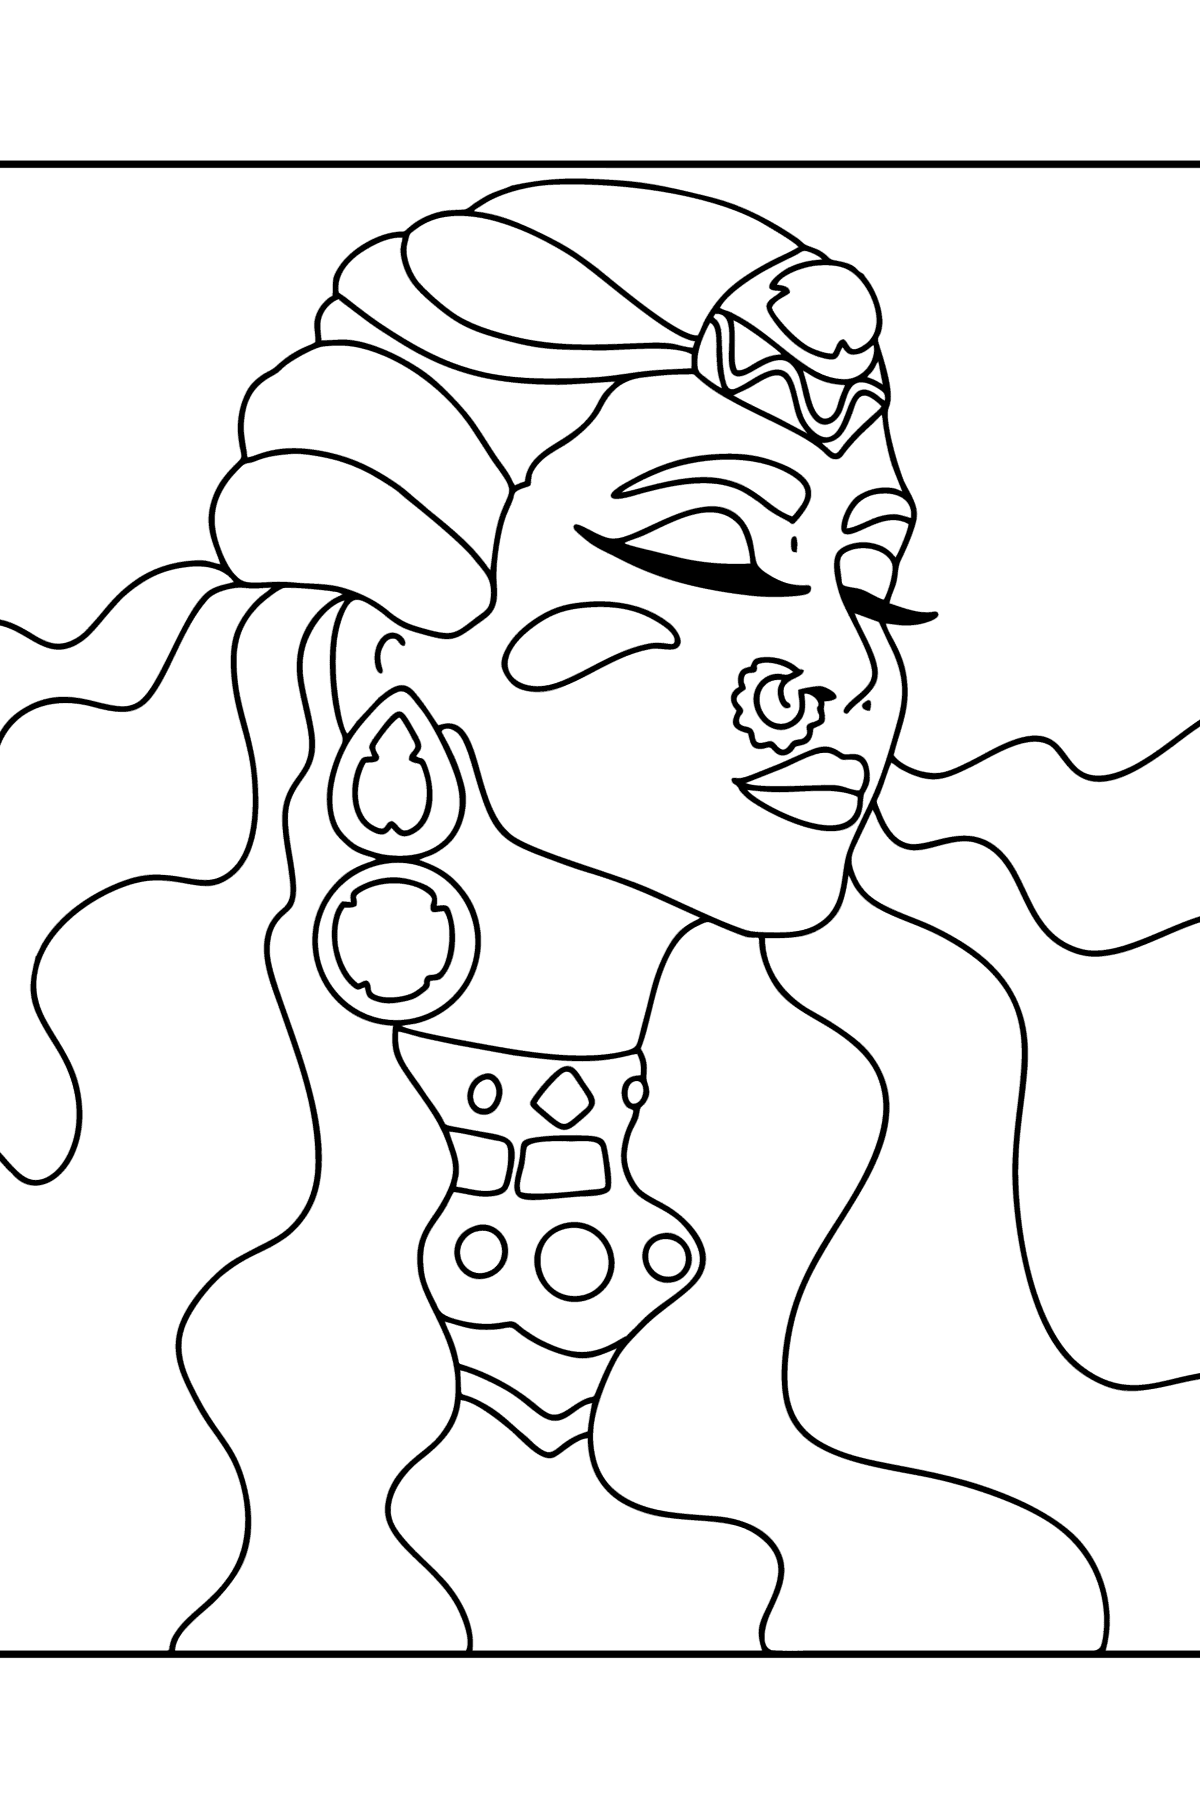 Beautiful face сoloring page - Coloring Pages for Kids